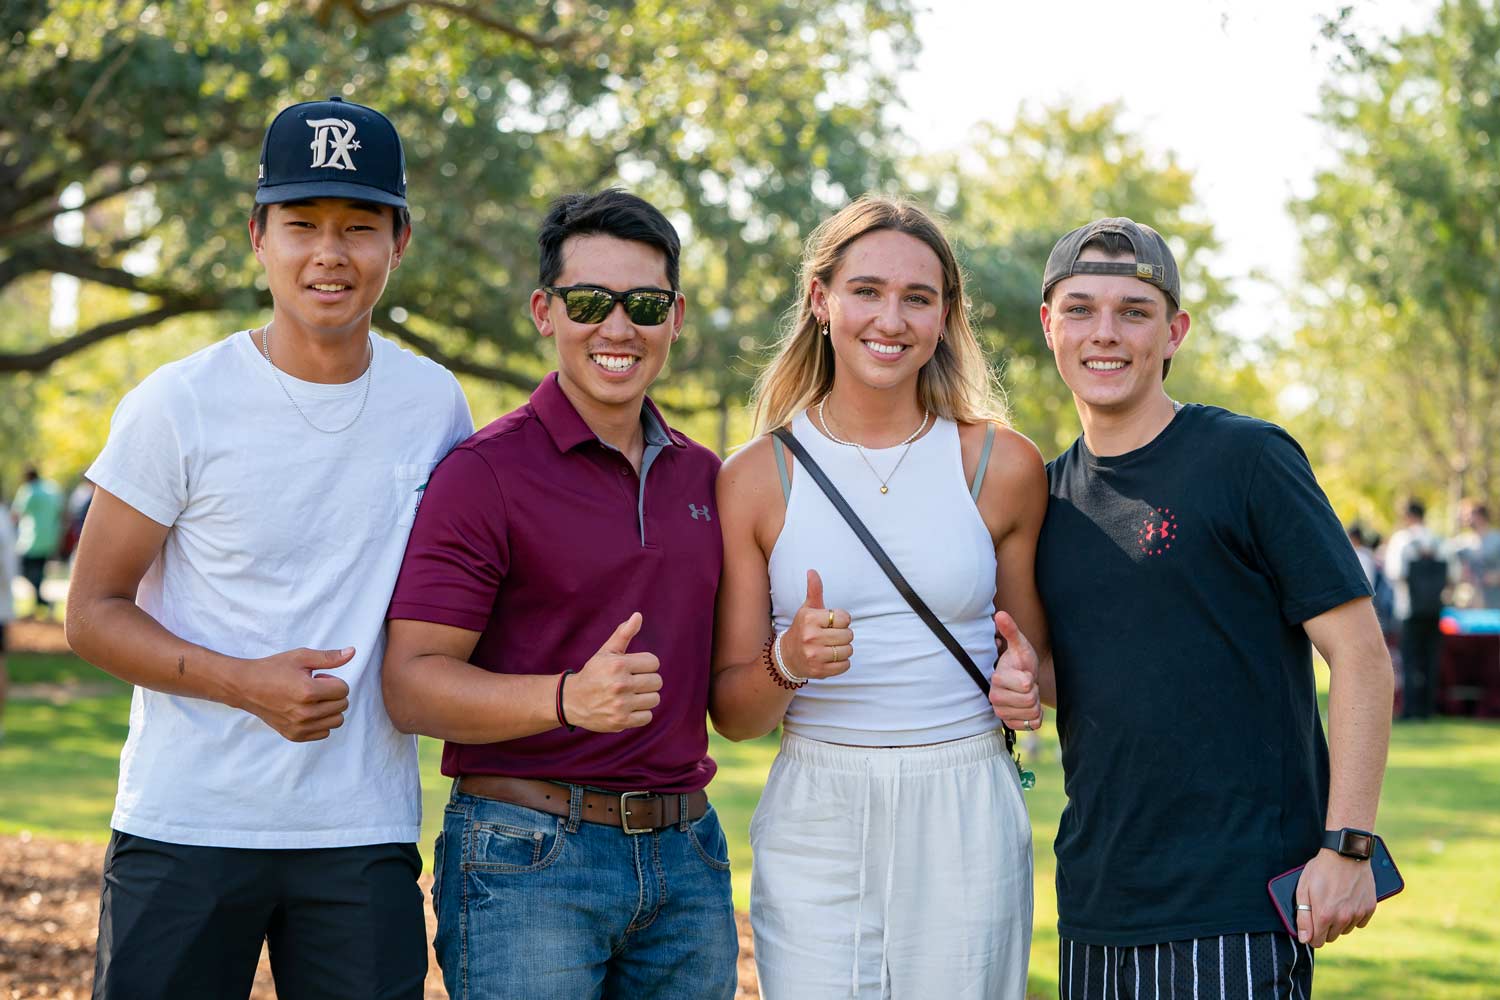 Texas A&M Students posing for a photo at Aggie Park